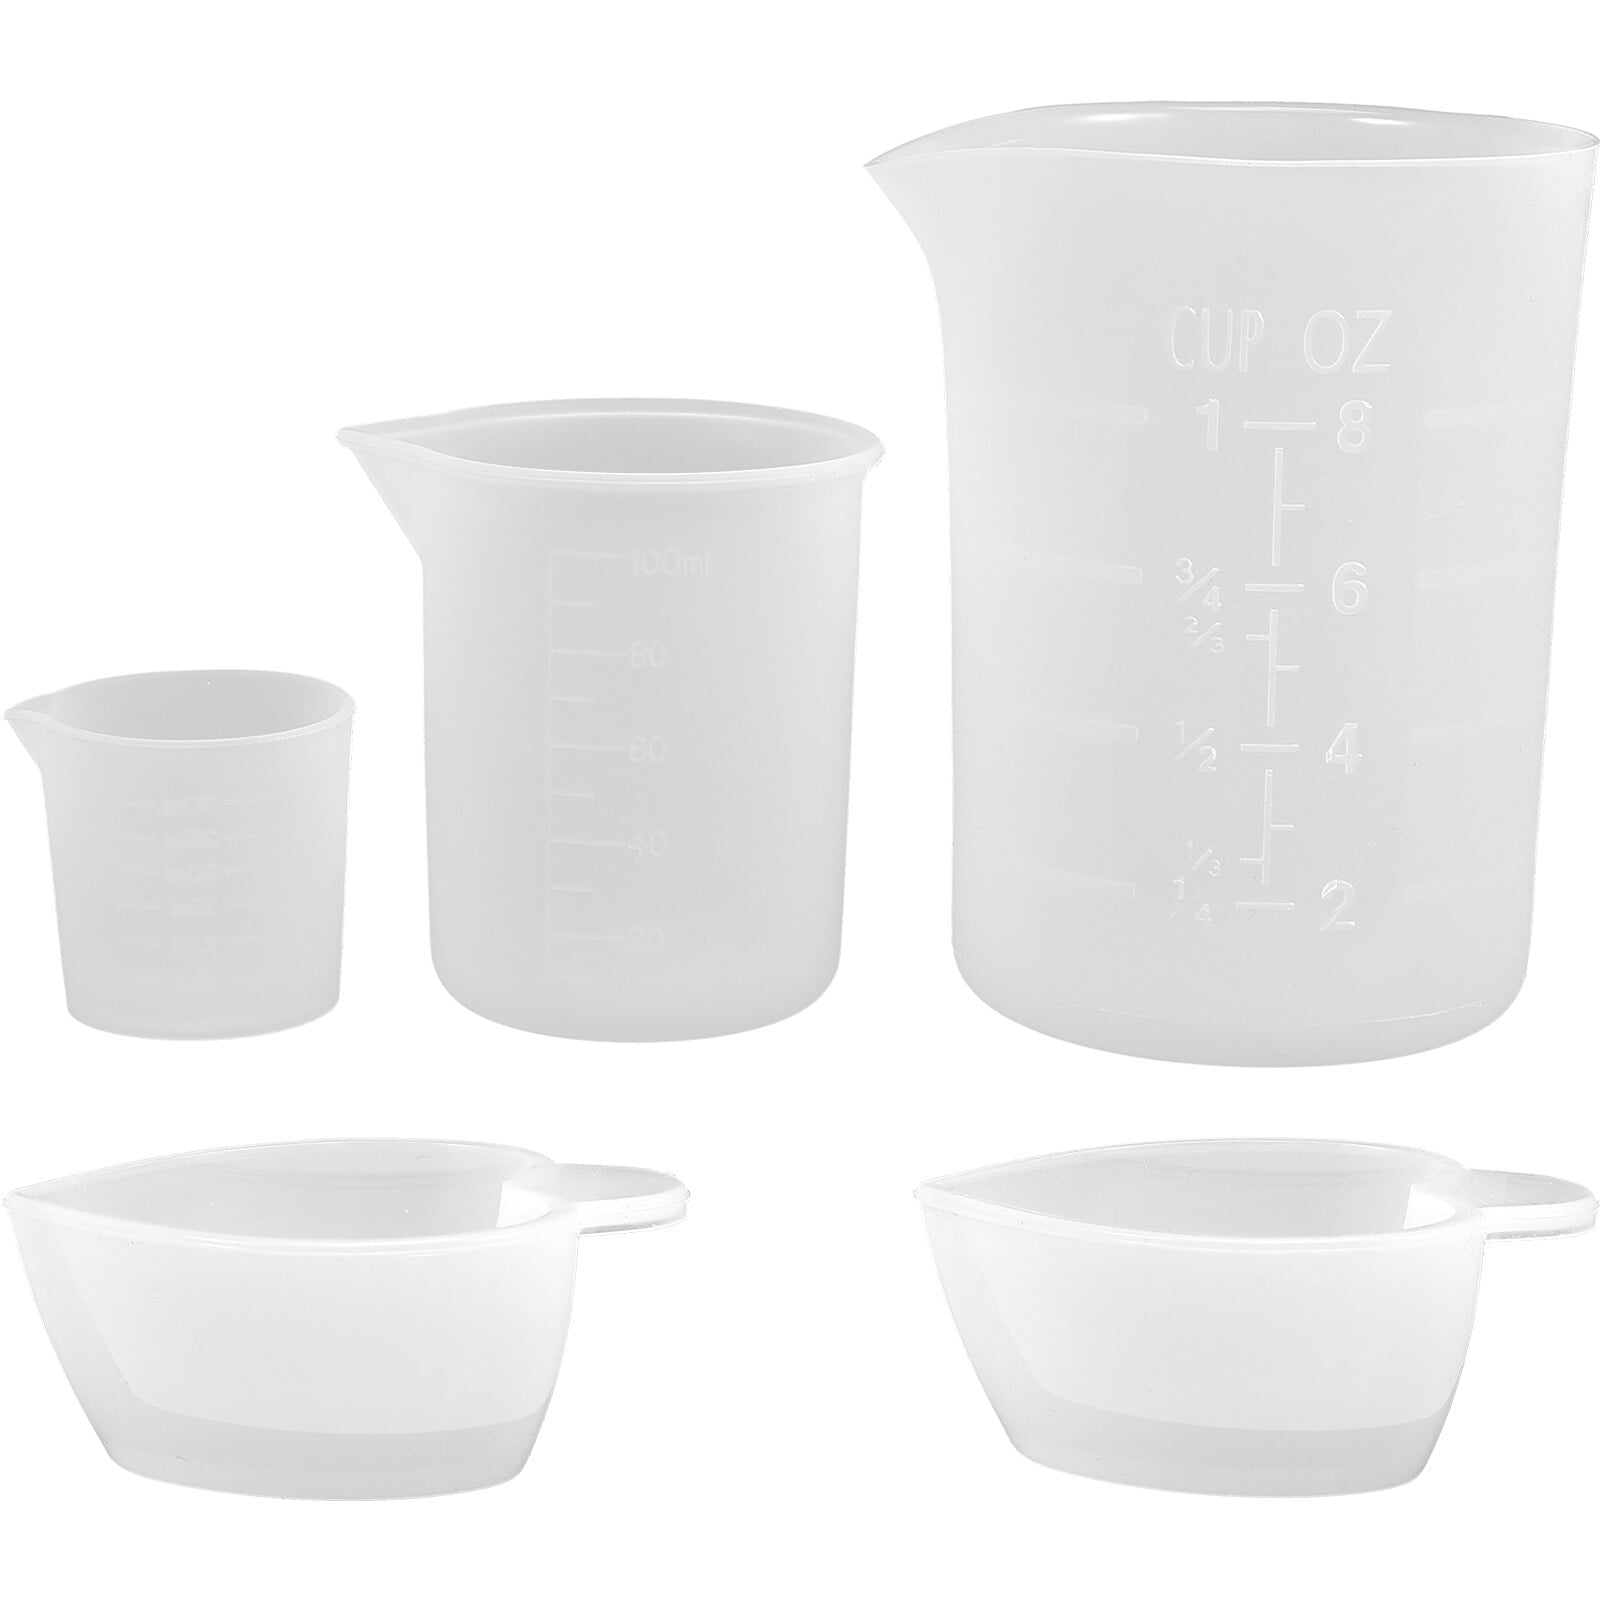  RUNROTOO 6Pcs 50ml Silicone Measuring Cup resin mixing cups  silicone measuring cups DIY craft tools scaled measuring cups mixology kit  resin crafts silicone mixing cups for resin epoxy cups: Home 